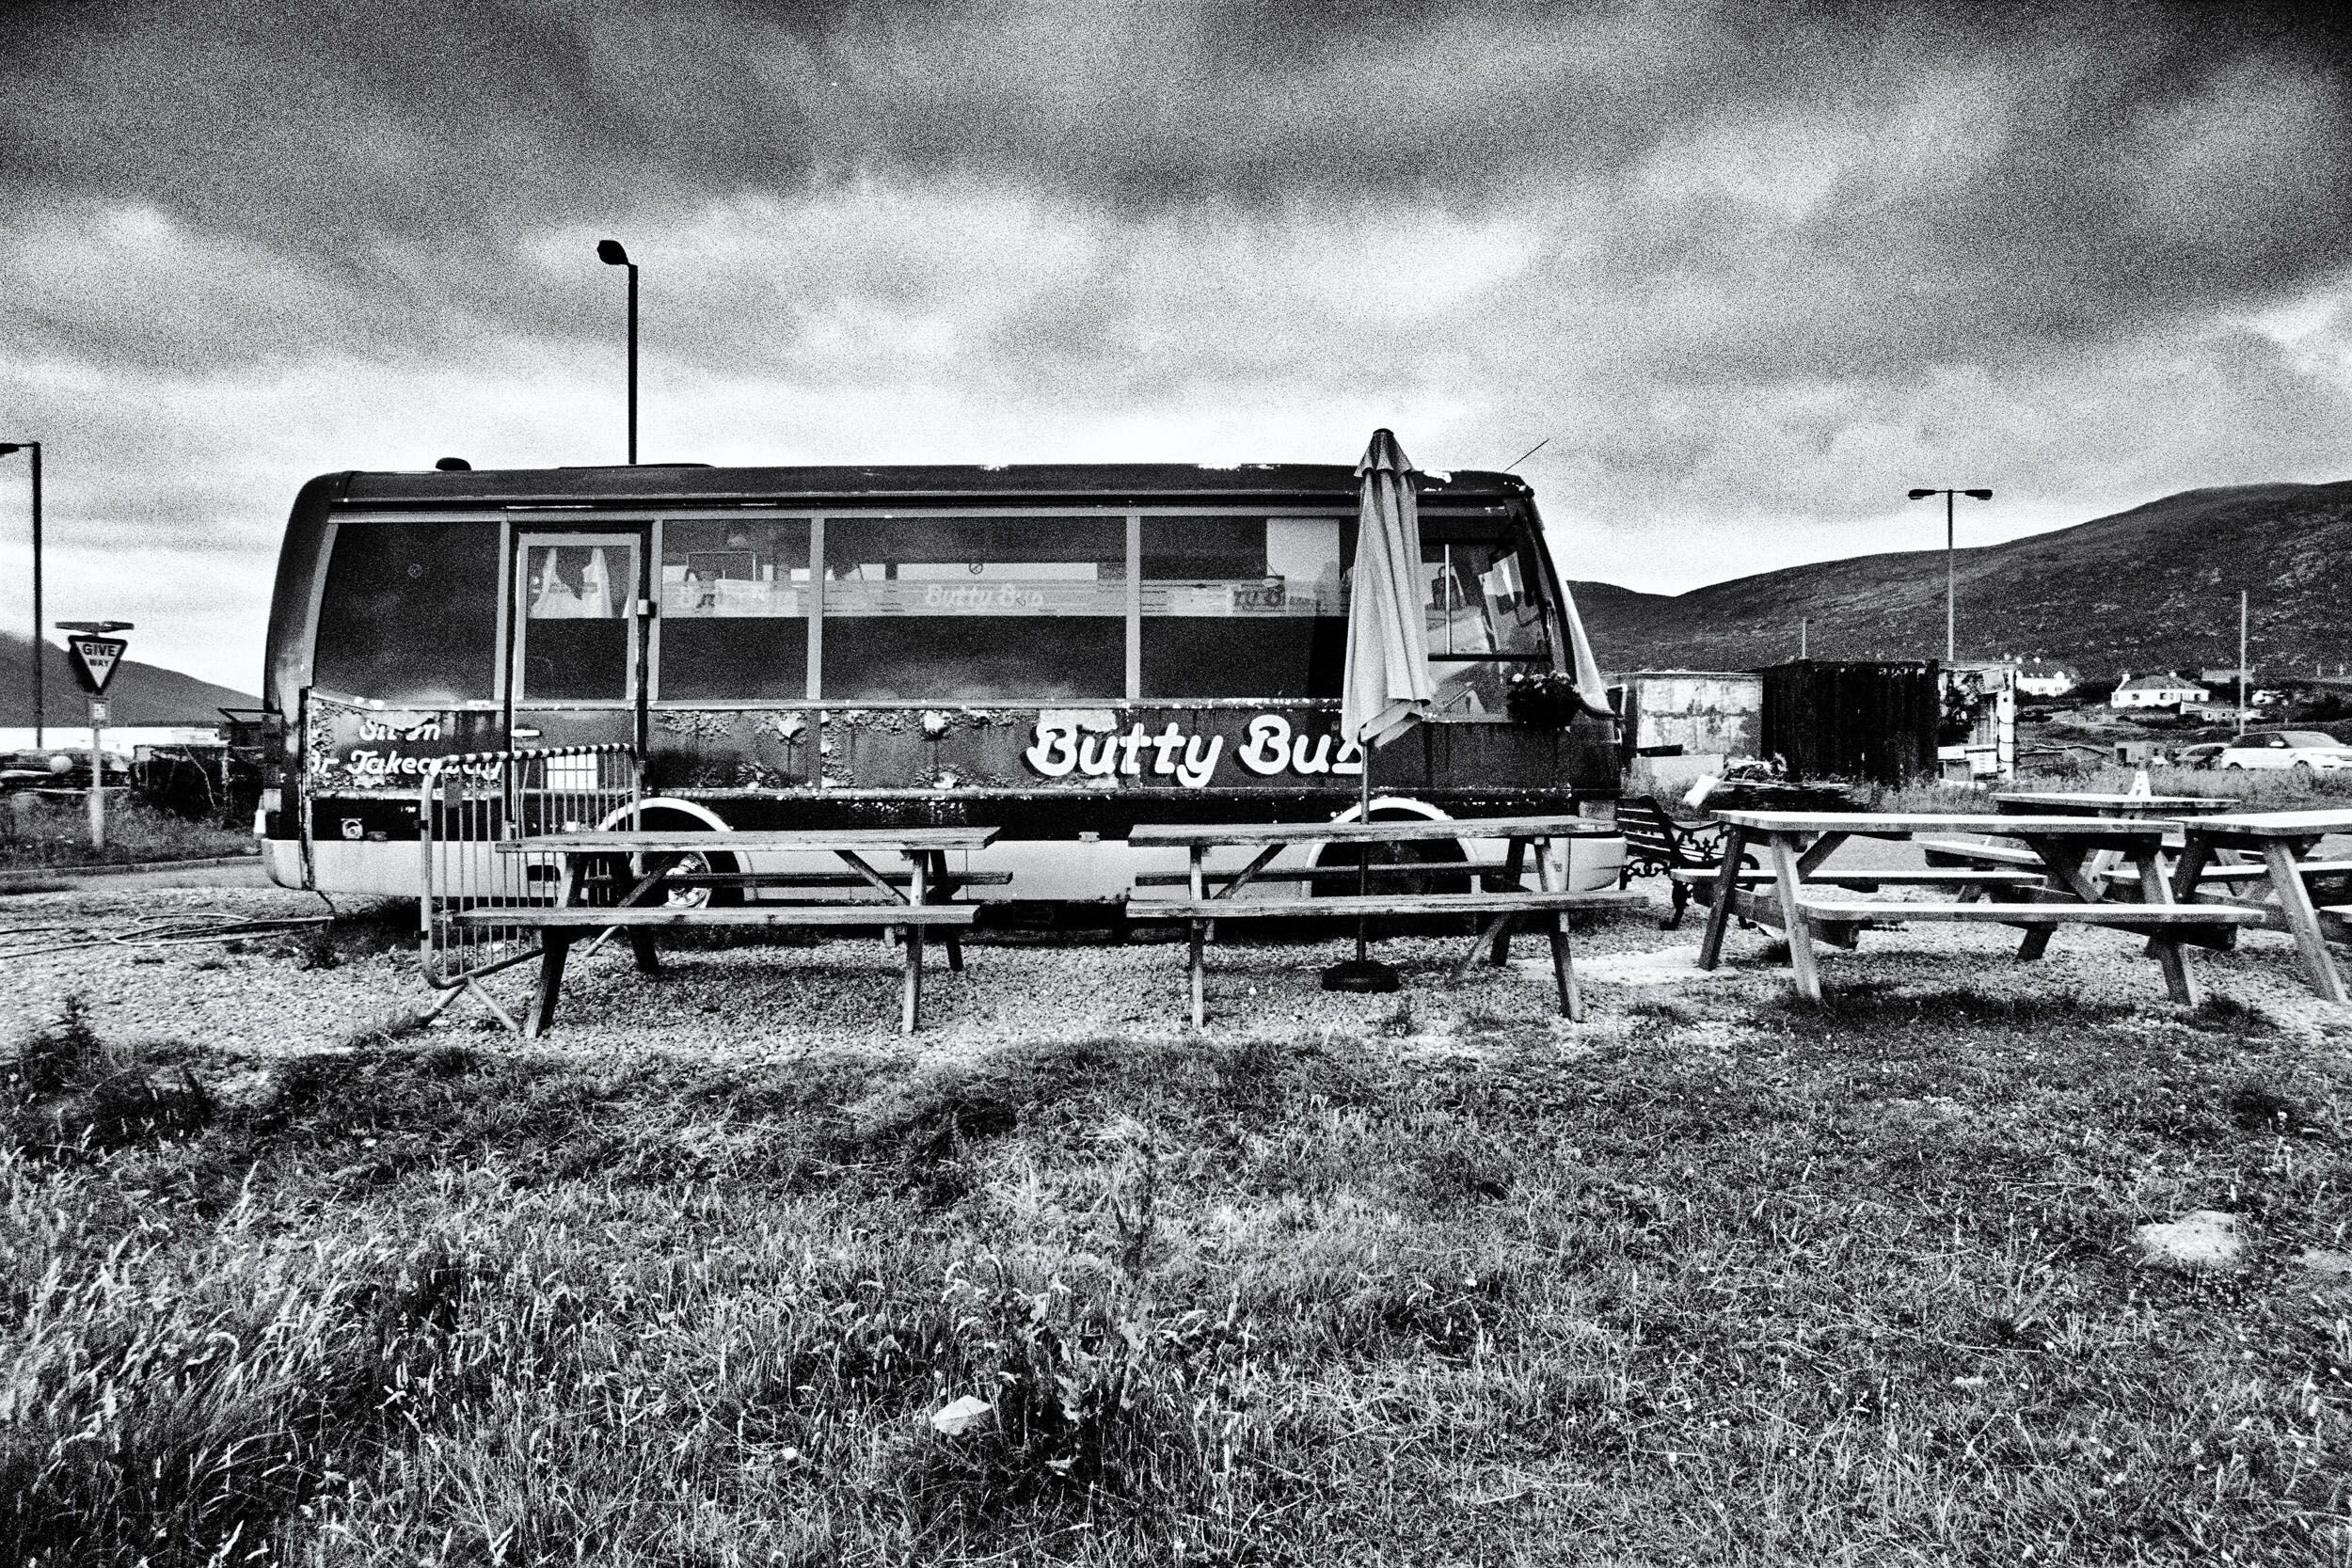  The Butty Bus, Leverburgh, Isle of Harris, 2019 